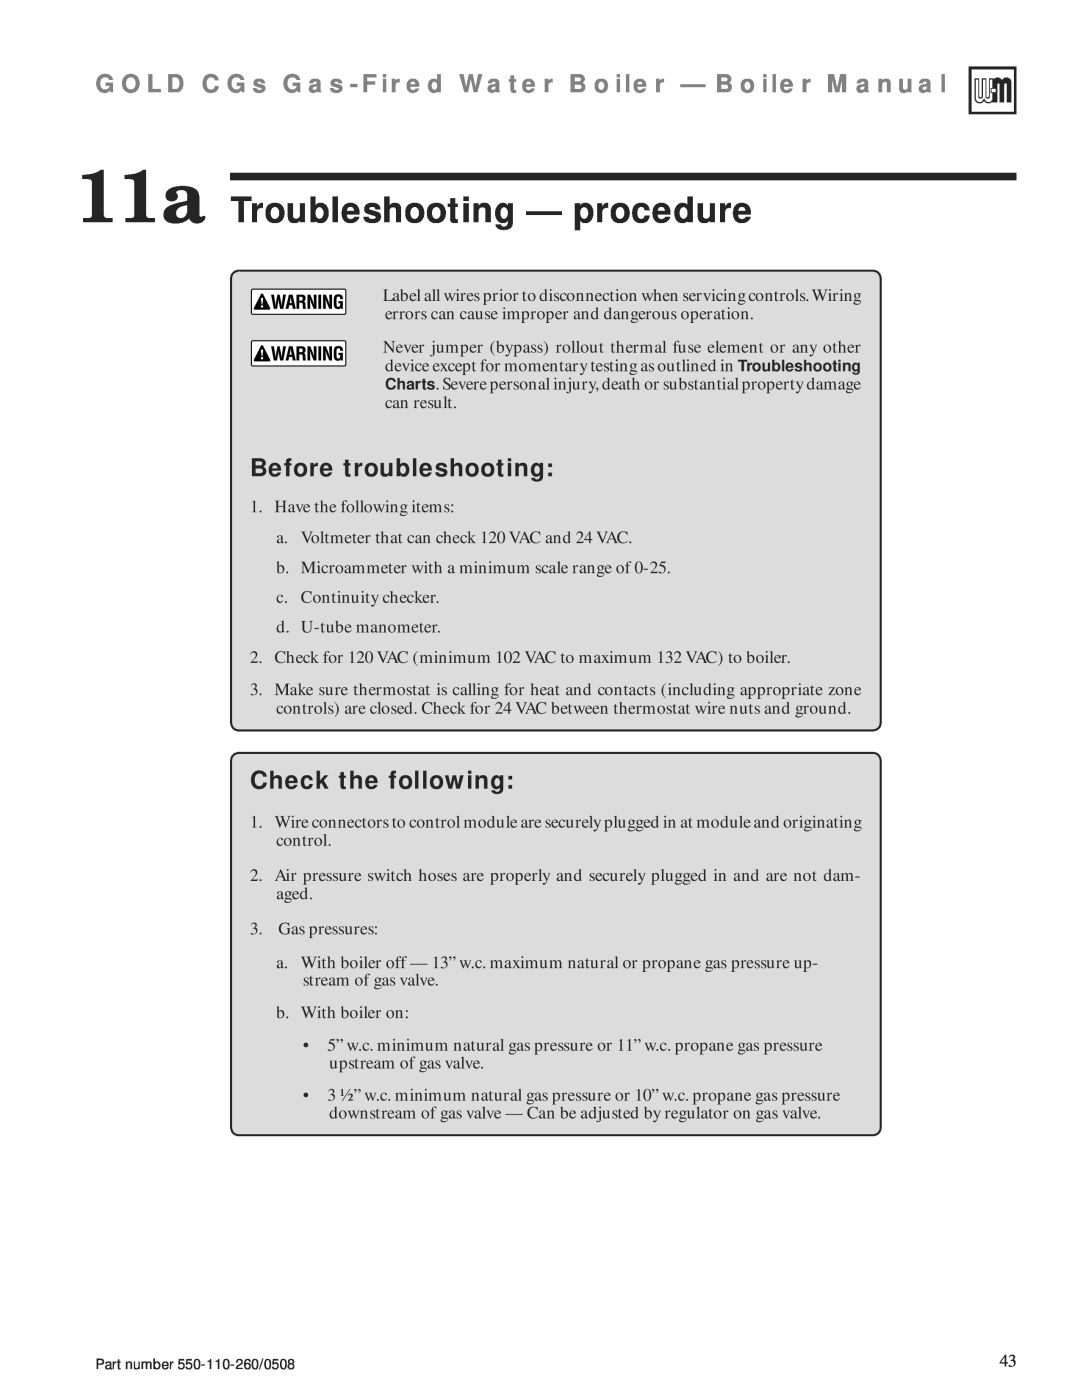 Weil-McLain 550-110-260/0508 manual 11a Troubleshooting — procedure, Before troubleshooting, Check the following 